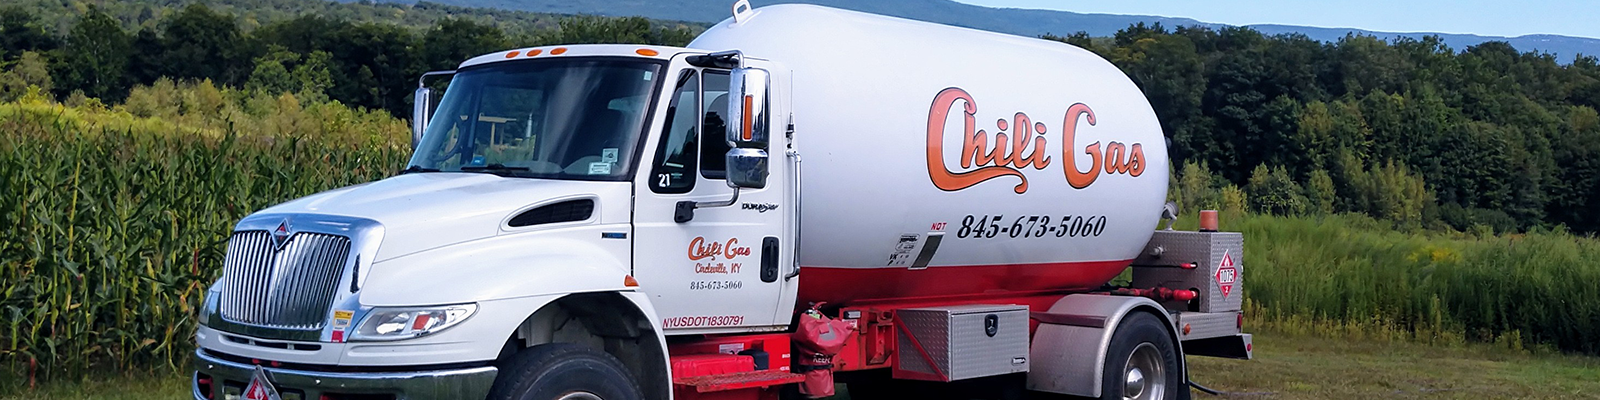 chili-gas-tank-truck-September-19.png